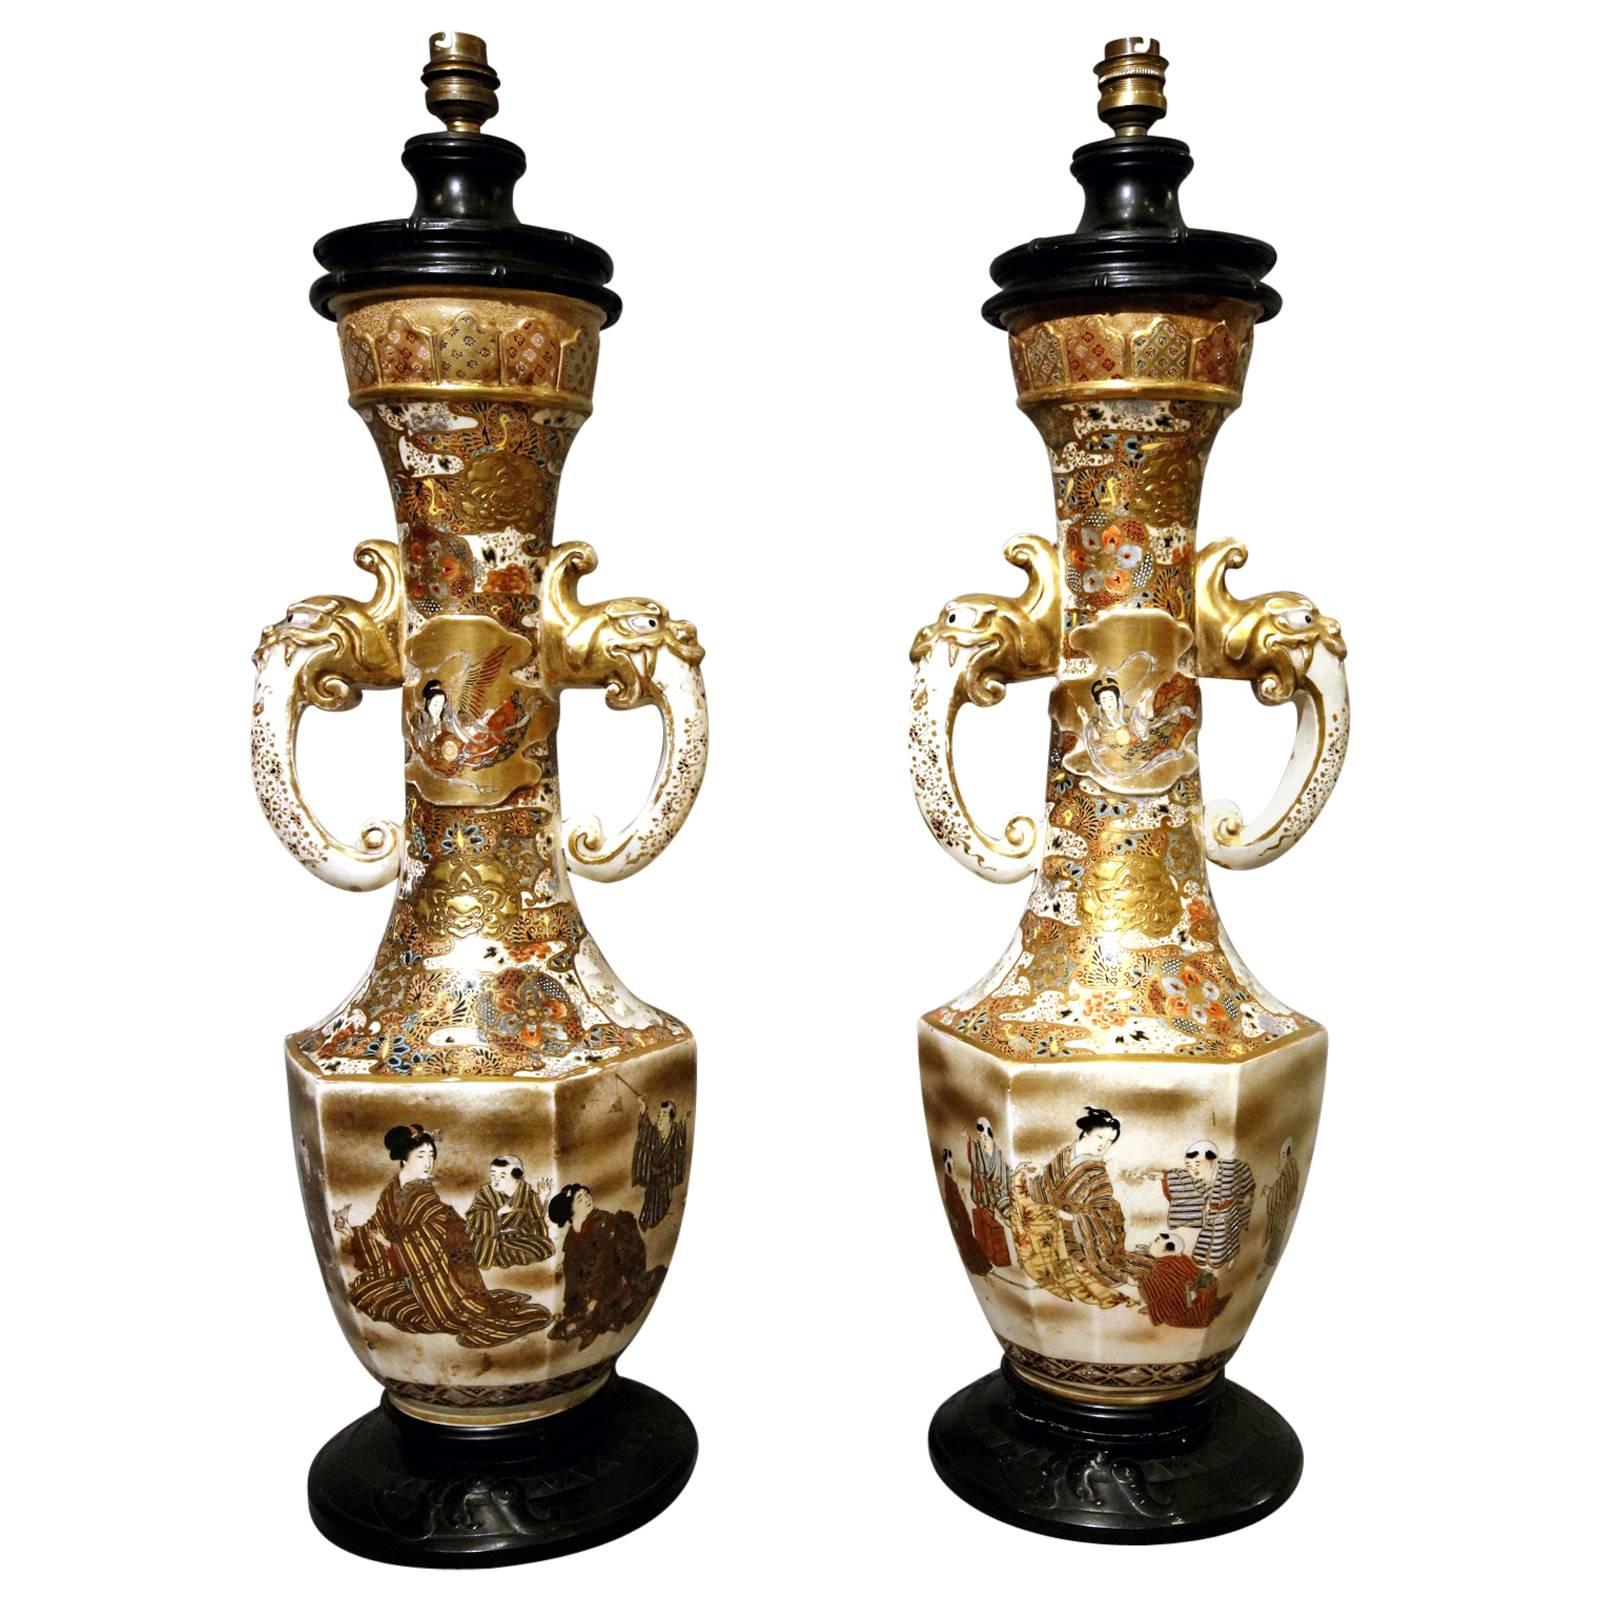 Rare Pair of Satsuma Table Lamps, Japan End of the 19th Century